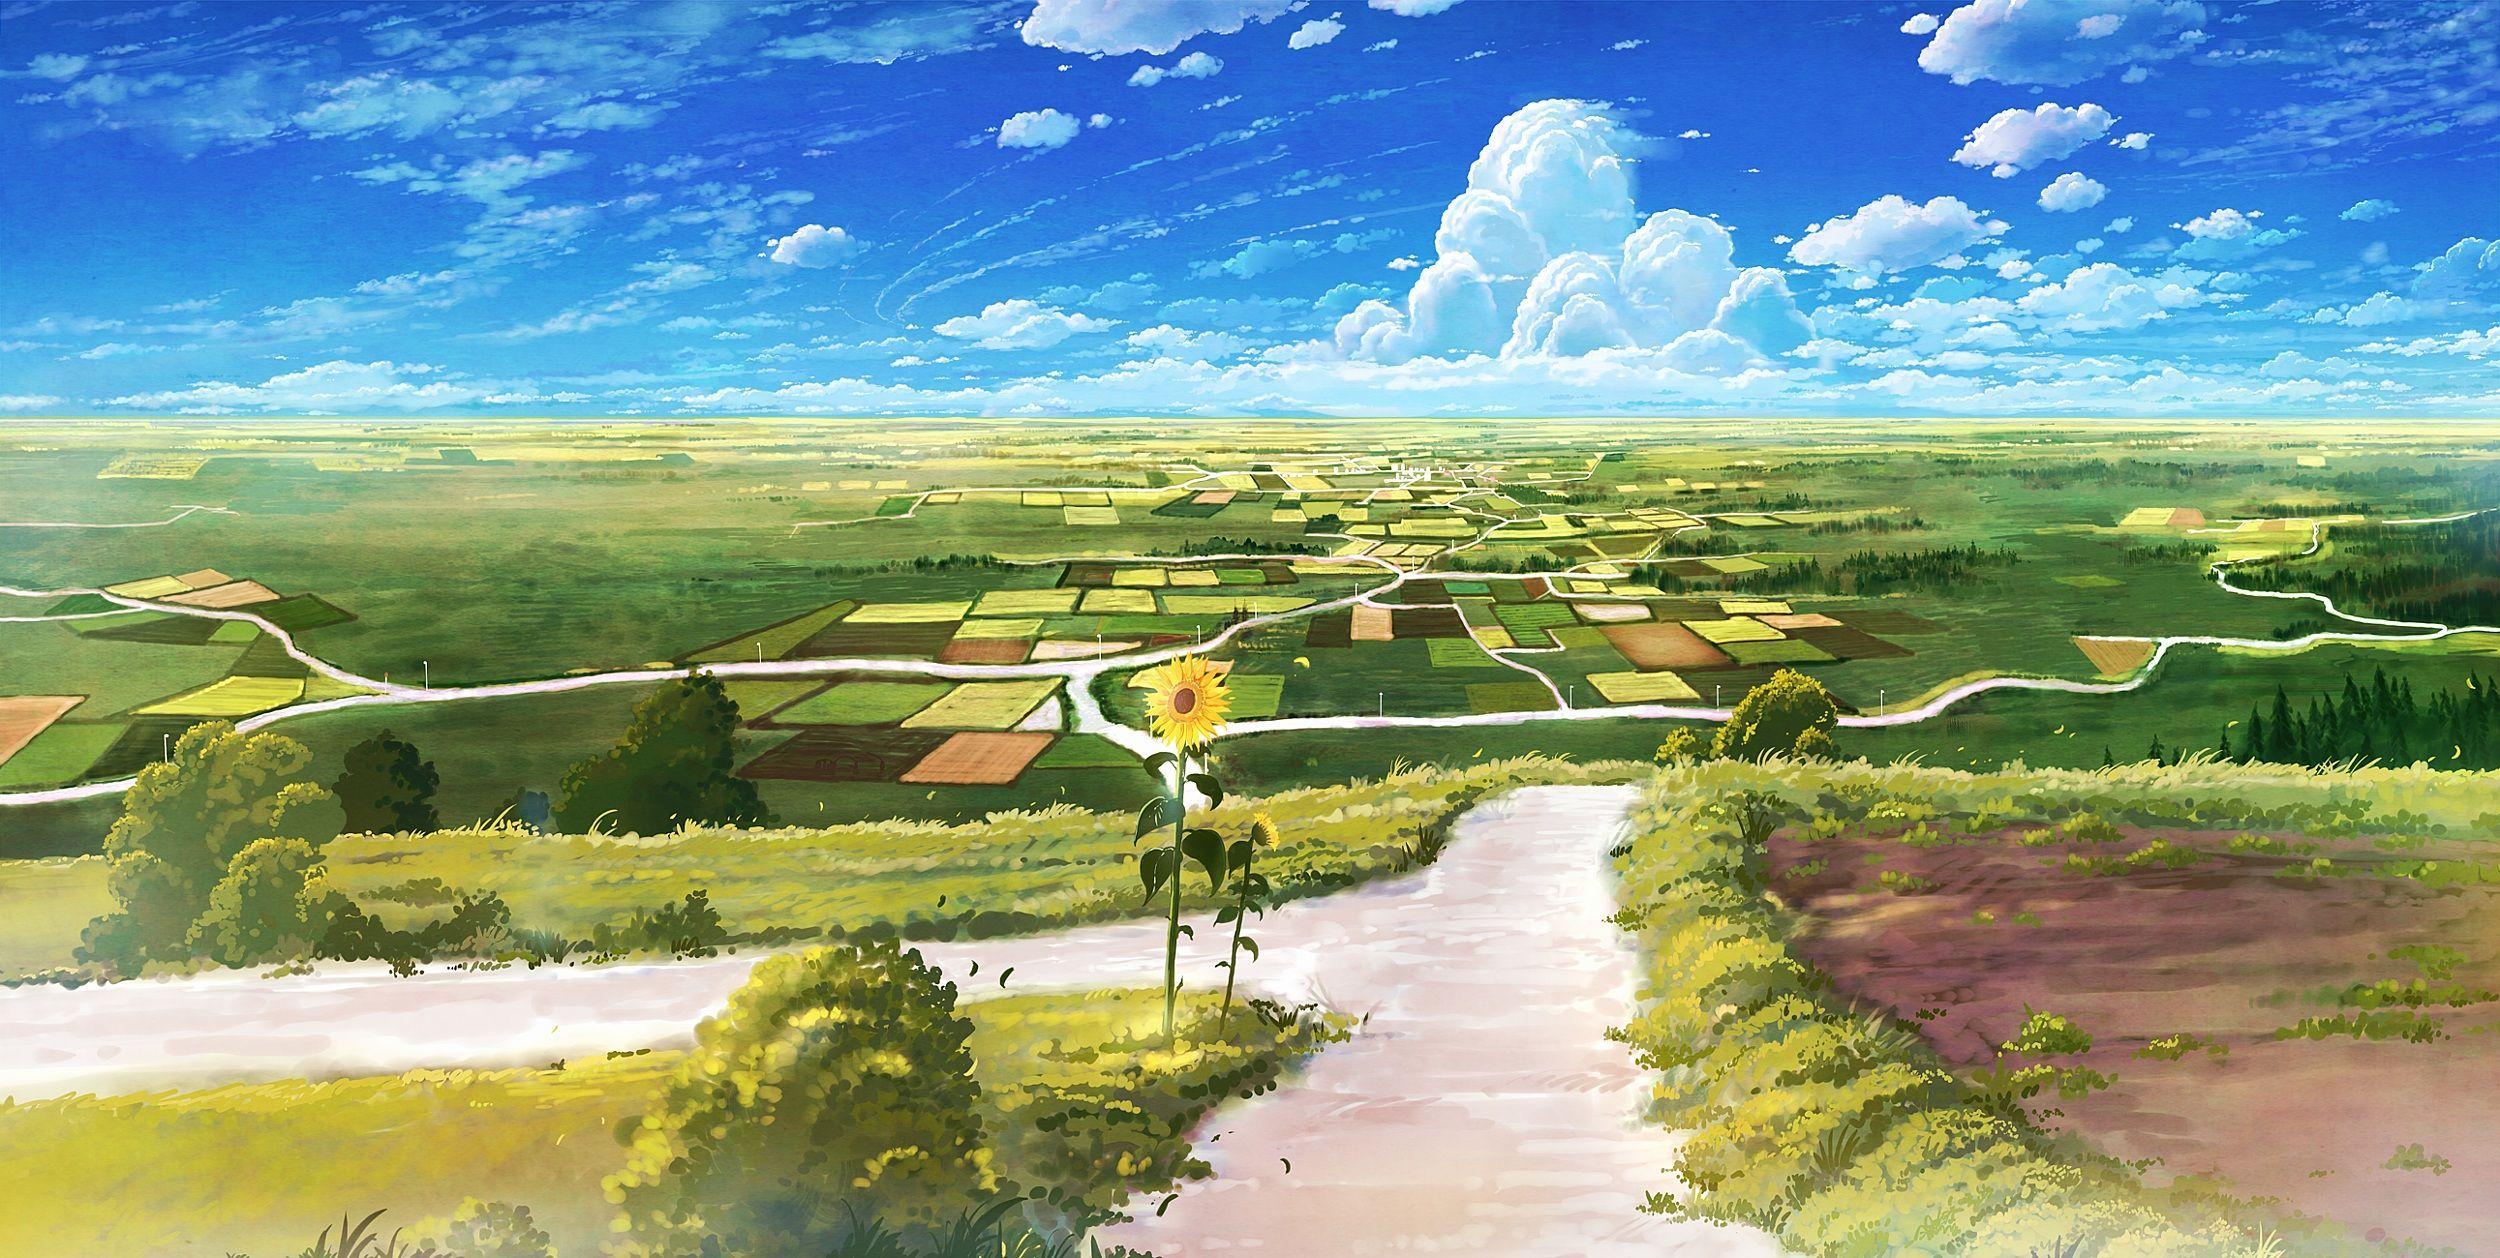 Nature Anime Scenery Background Wallpaper. Resources: Wallpaper